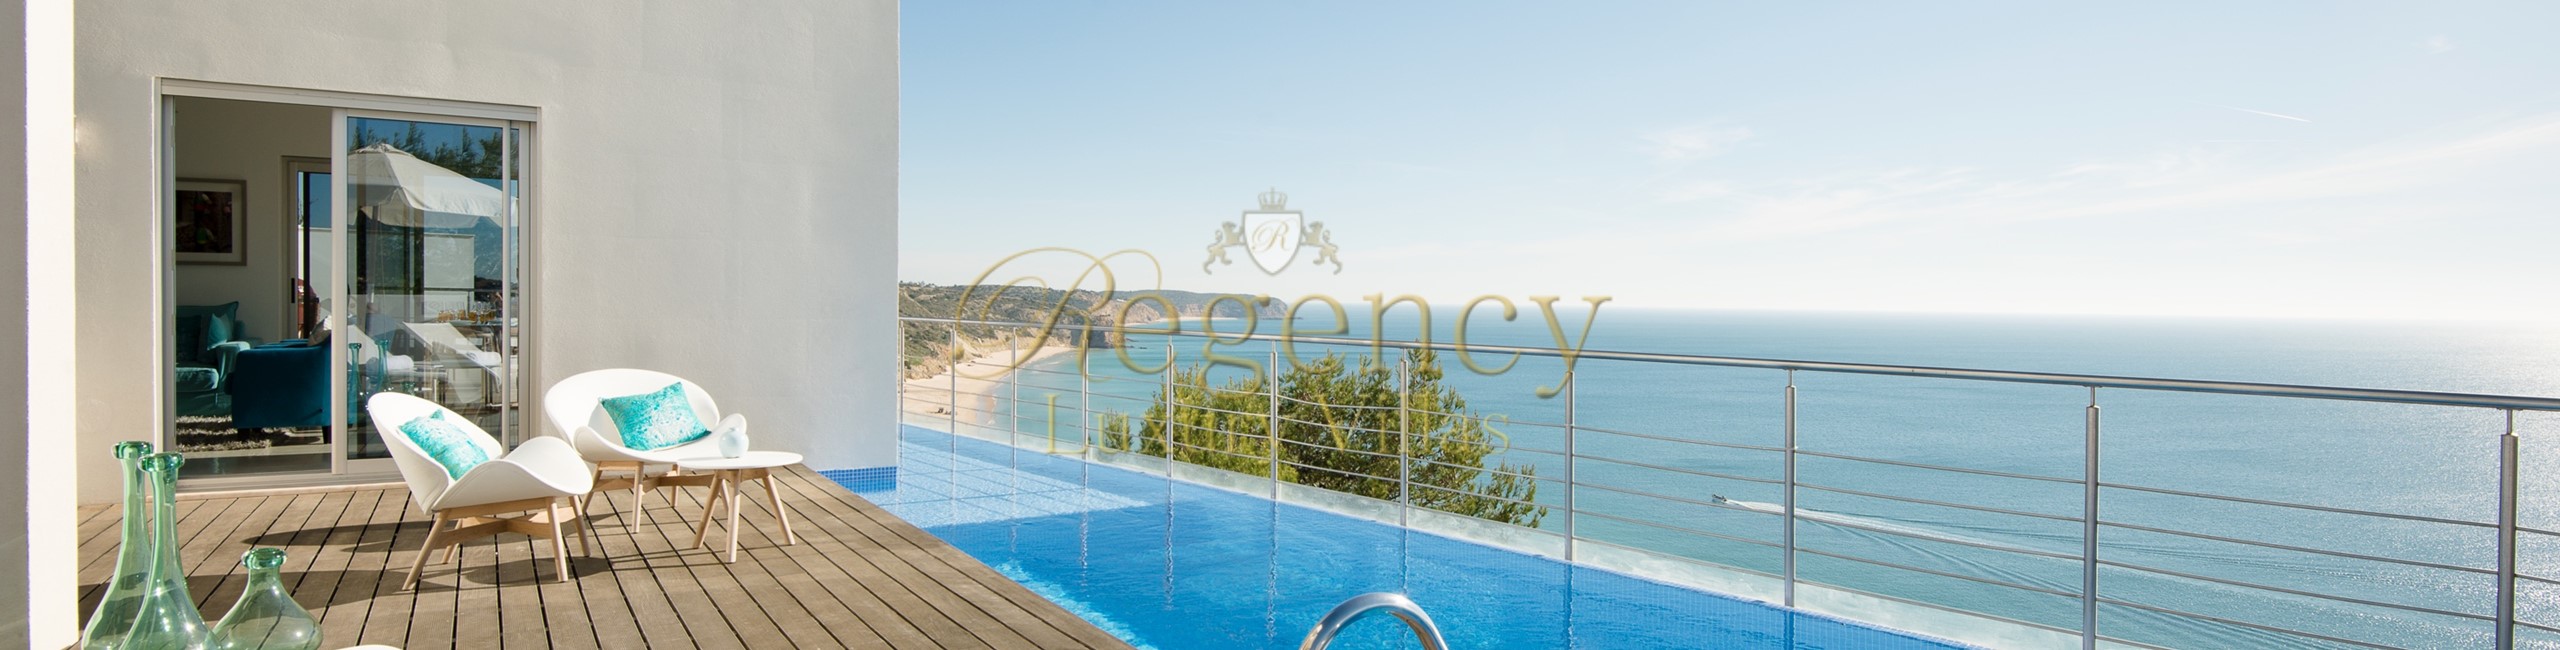 Luxury Villa To Rent In The Algarve Holidays